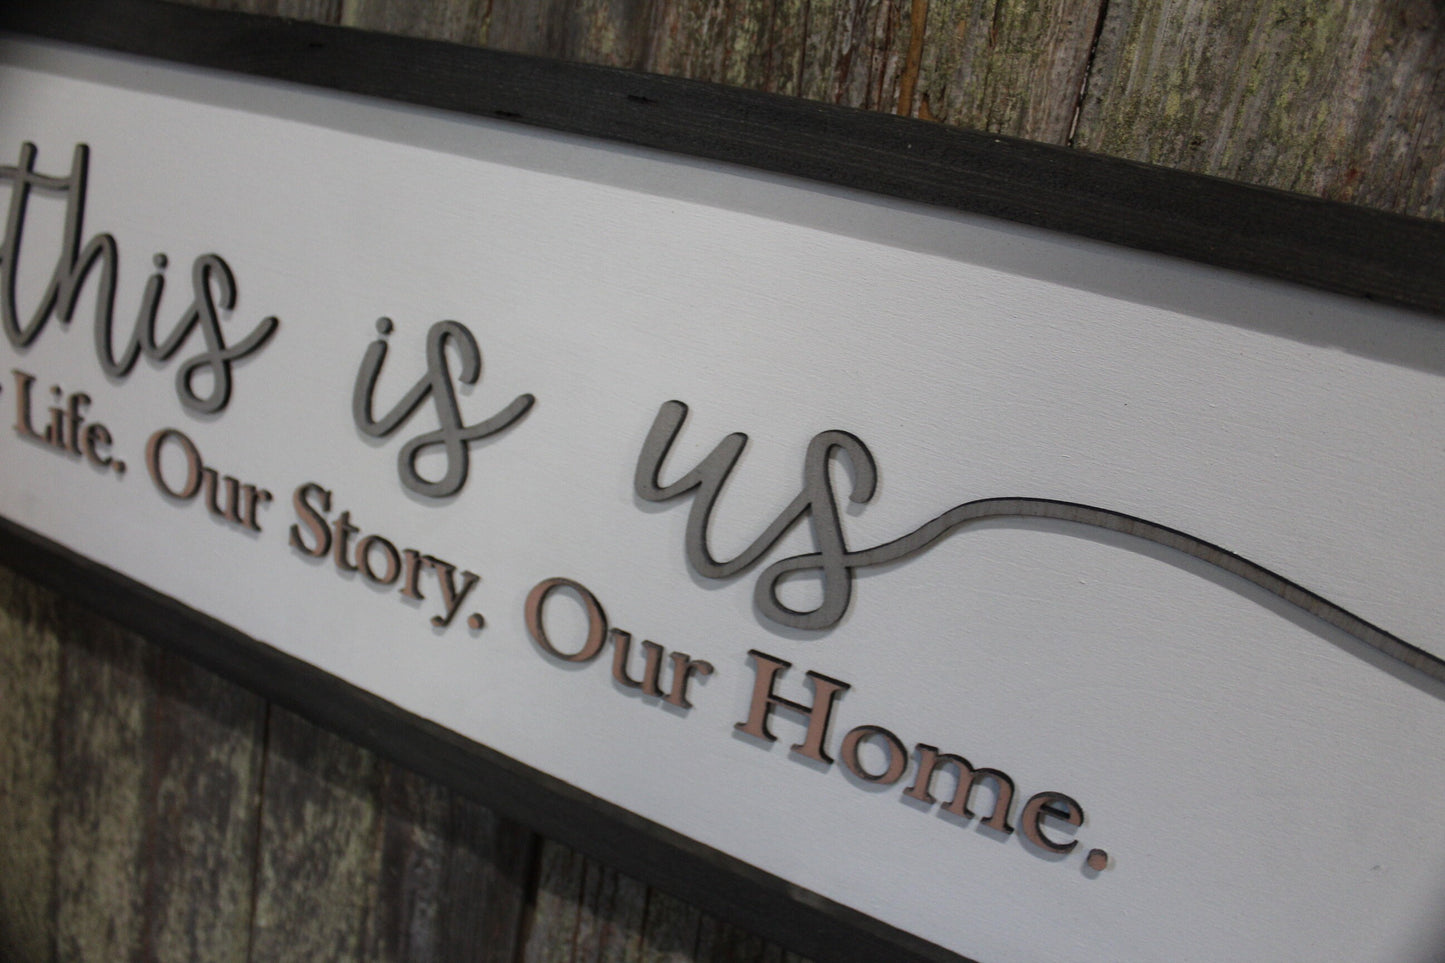 This is Us Our Life Our Story Our Home Large family sign wood fireplace living room dinning room shabby cottage chic farmhouse Pink and Gray